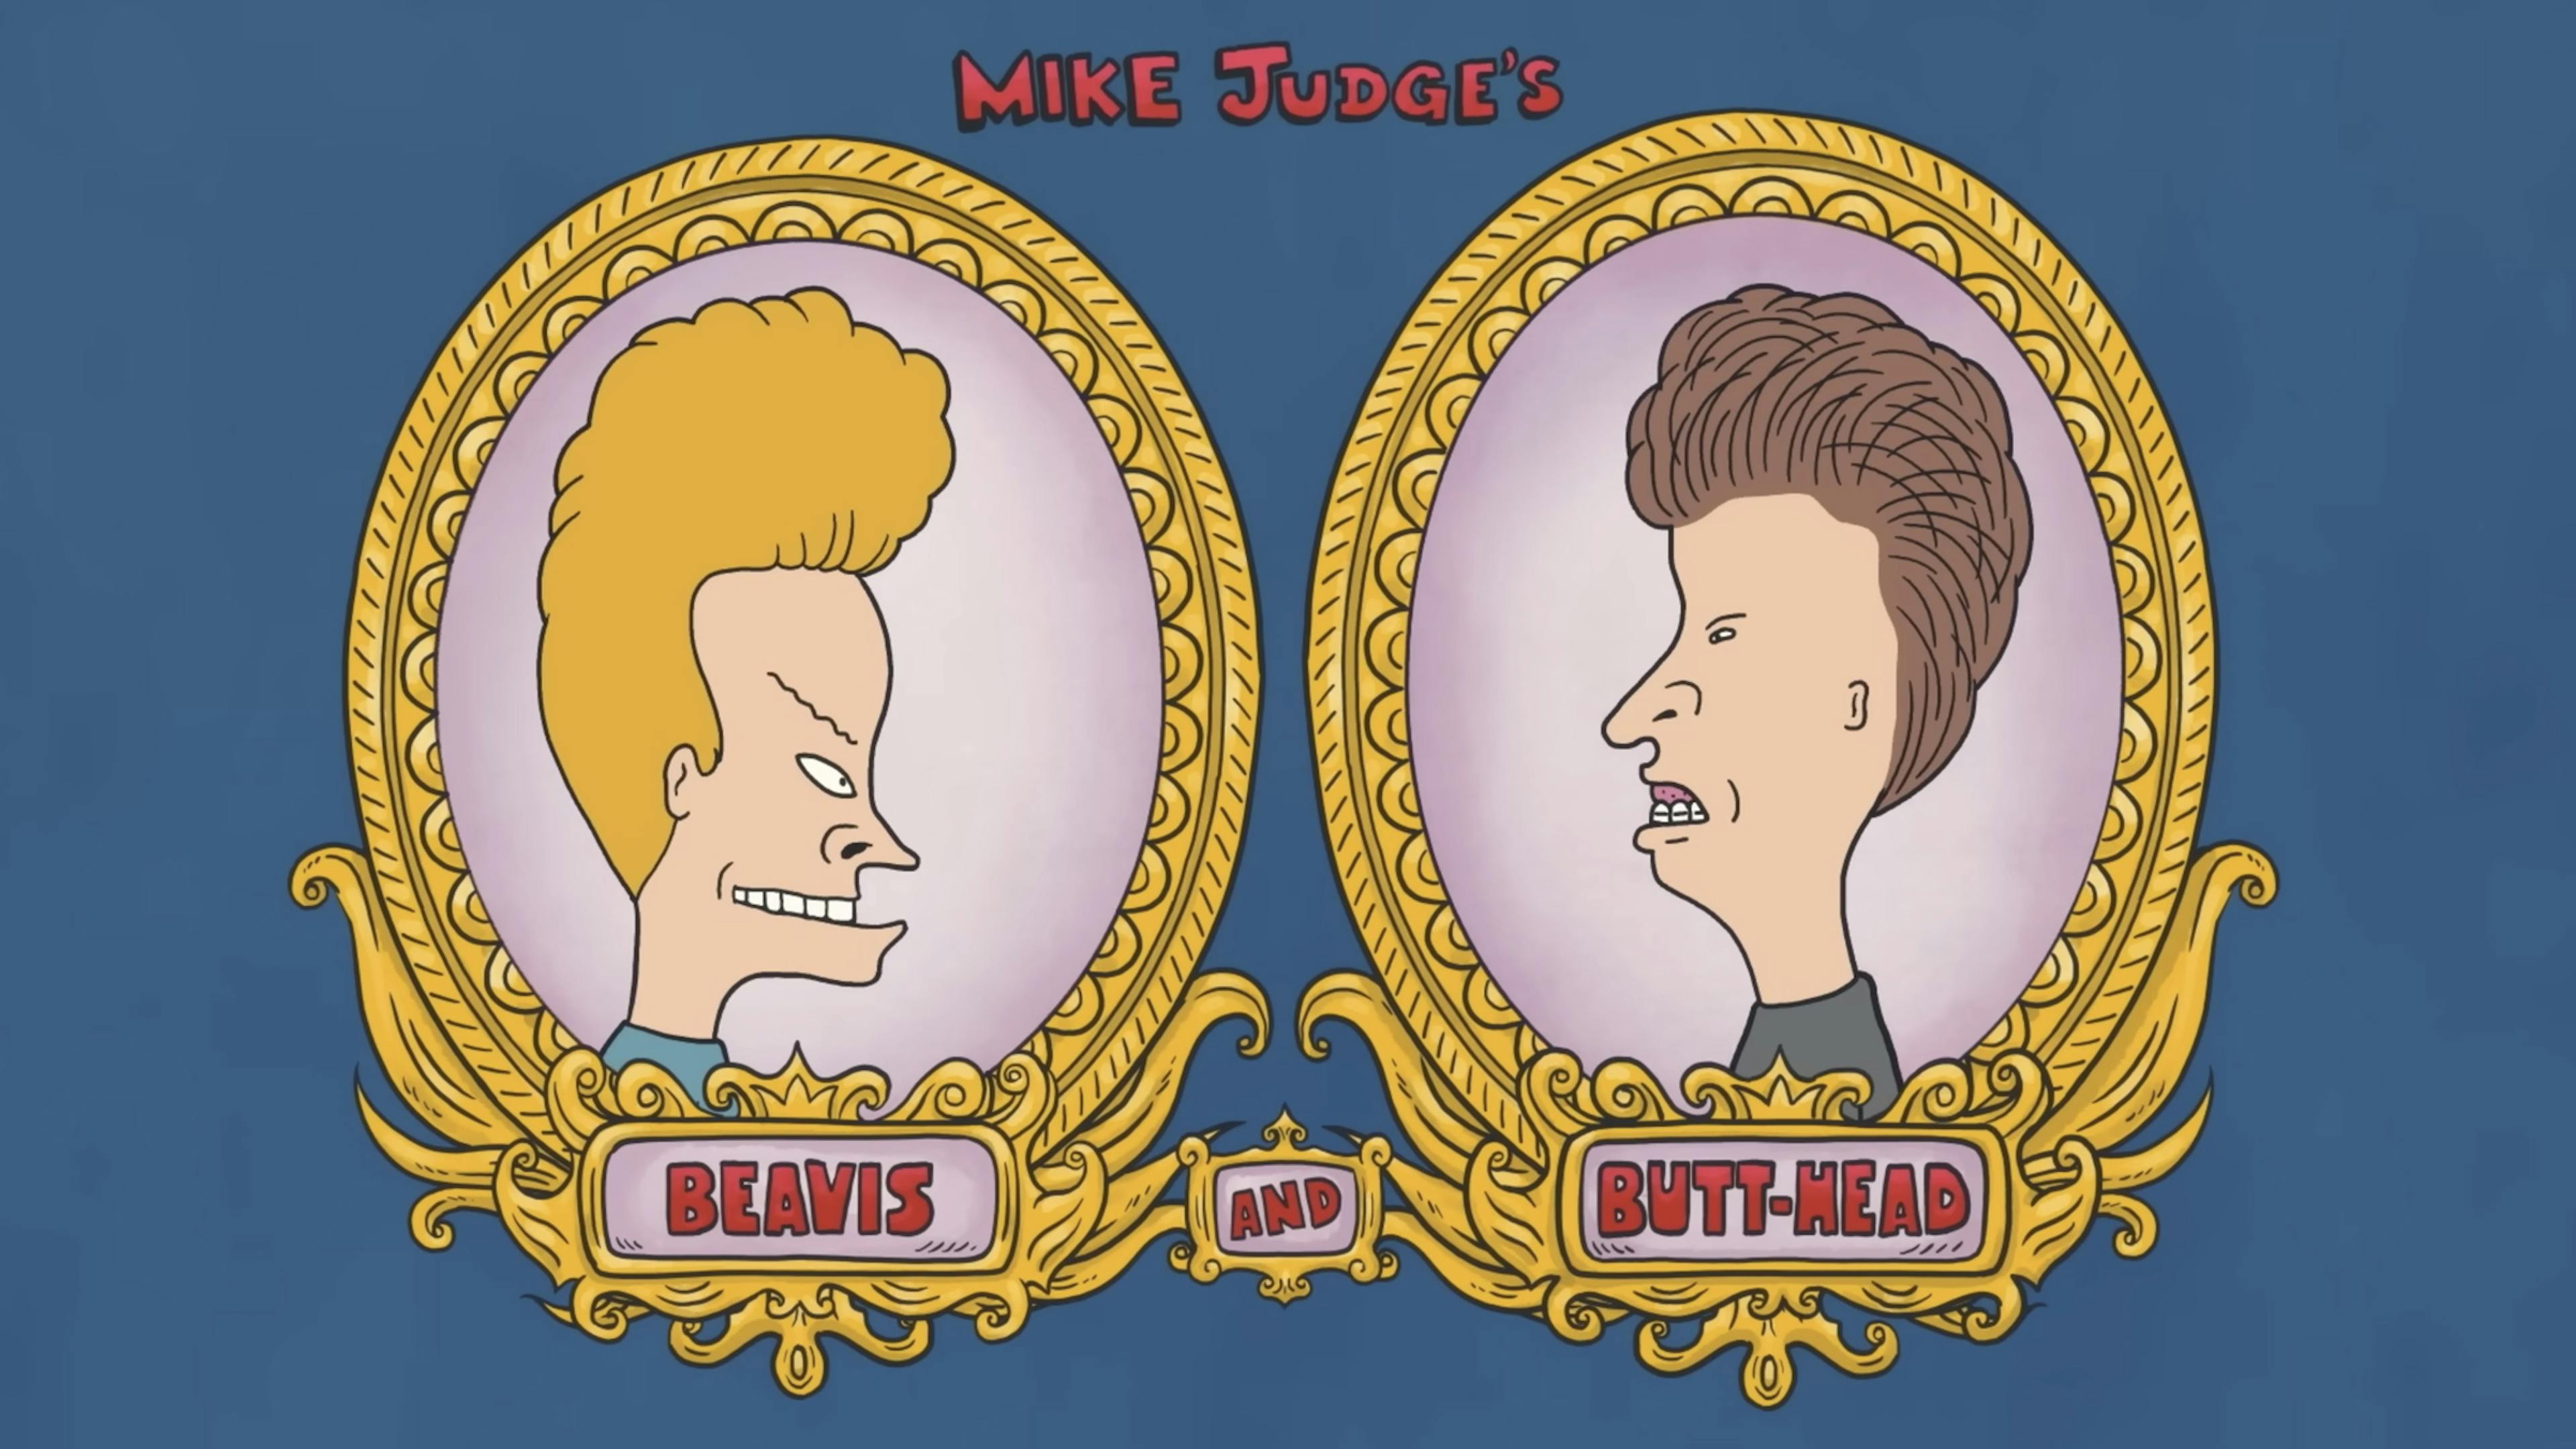 Beavis And Butt-Head comeback to feature videos from Post Malone, Olivia Rodrigo and more